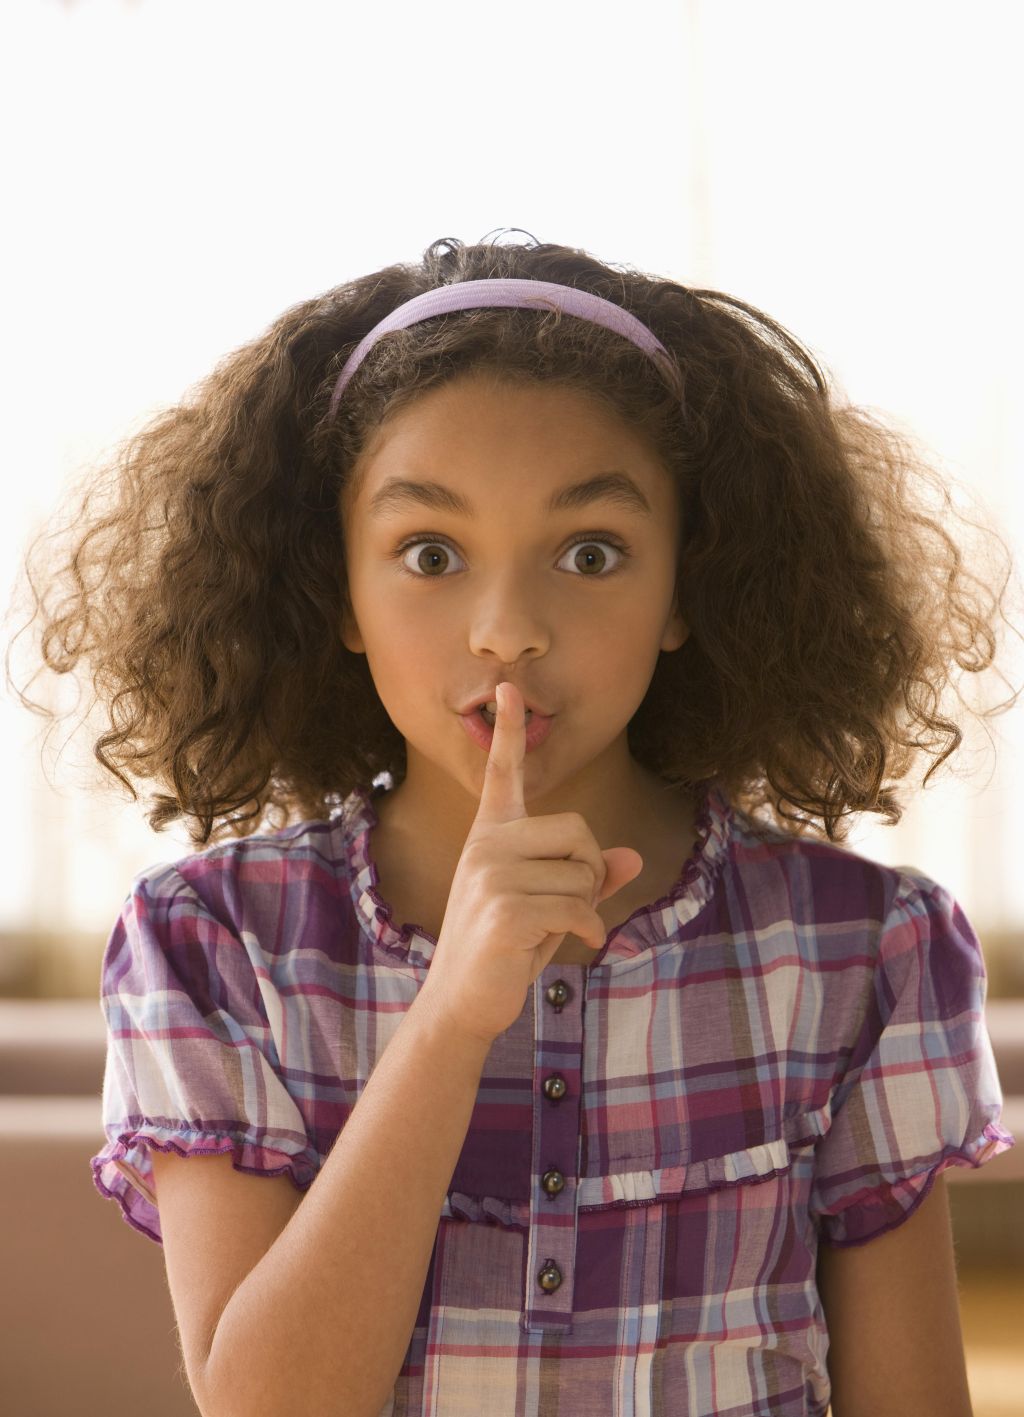 Mixed race girl making shhh gesture